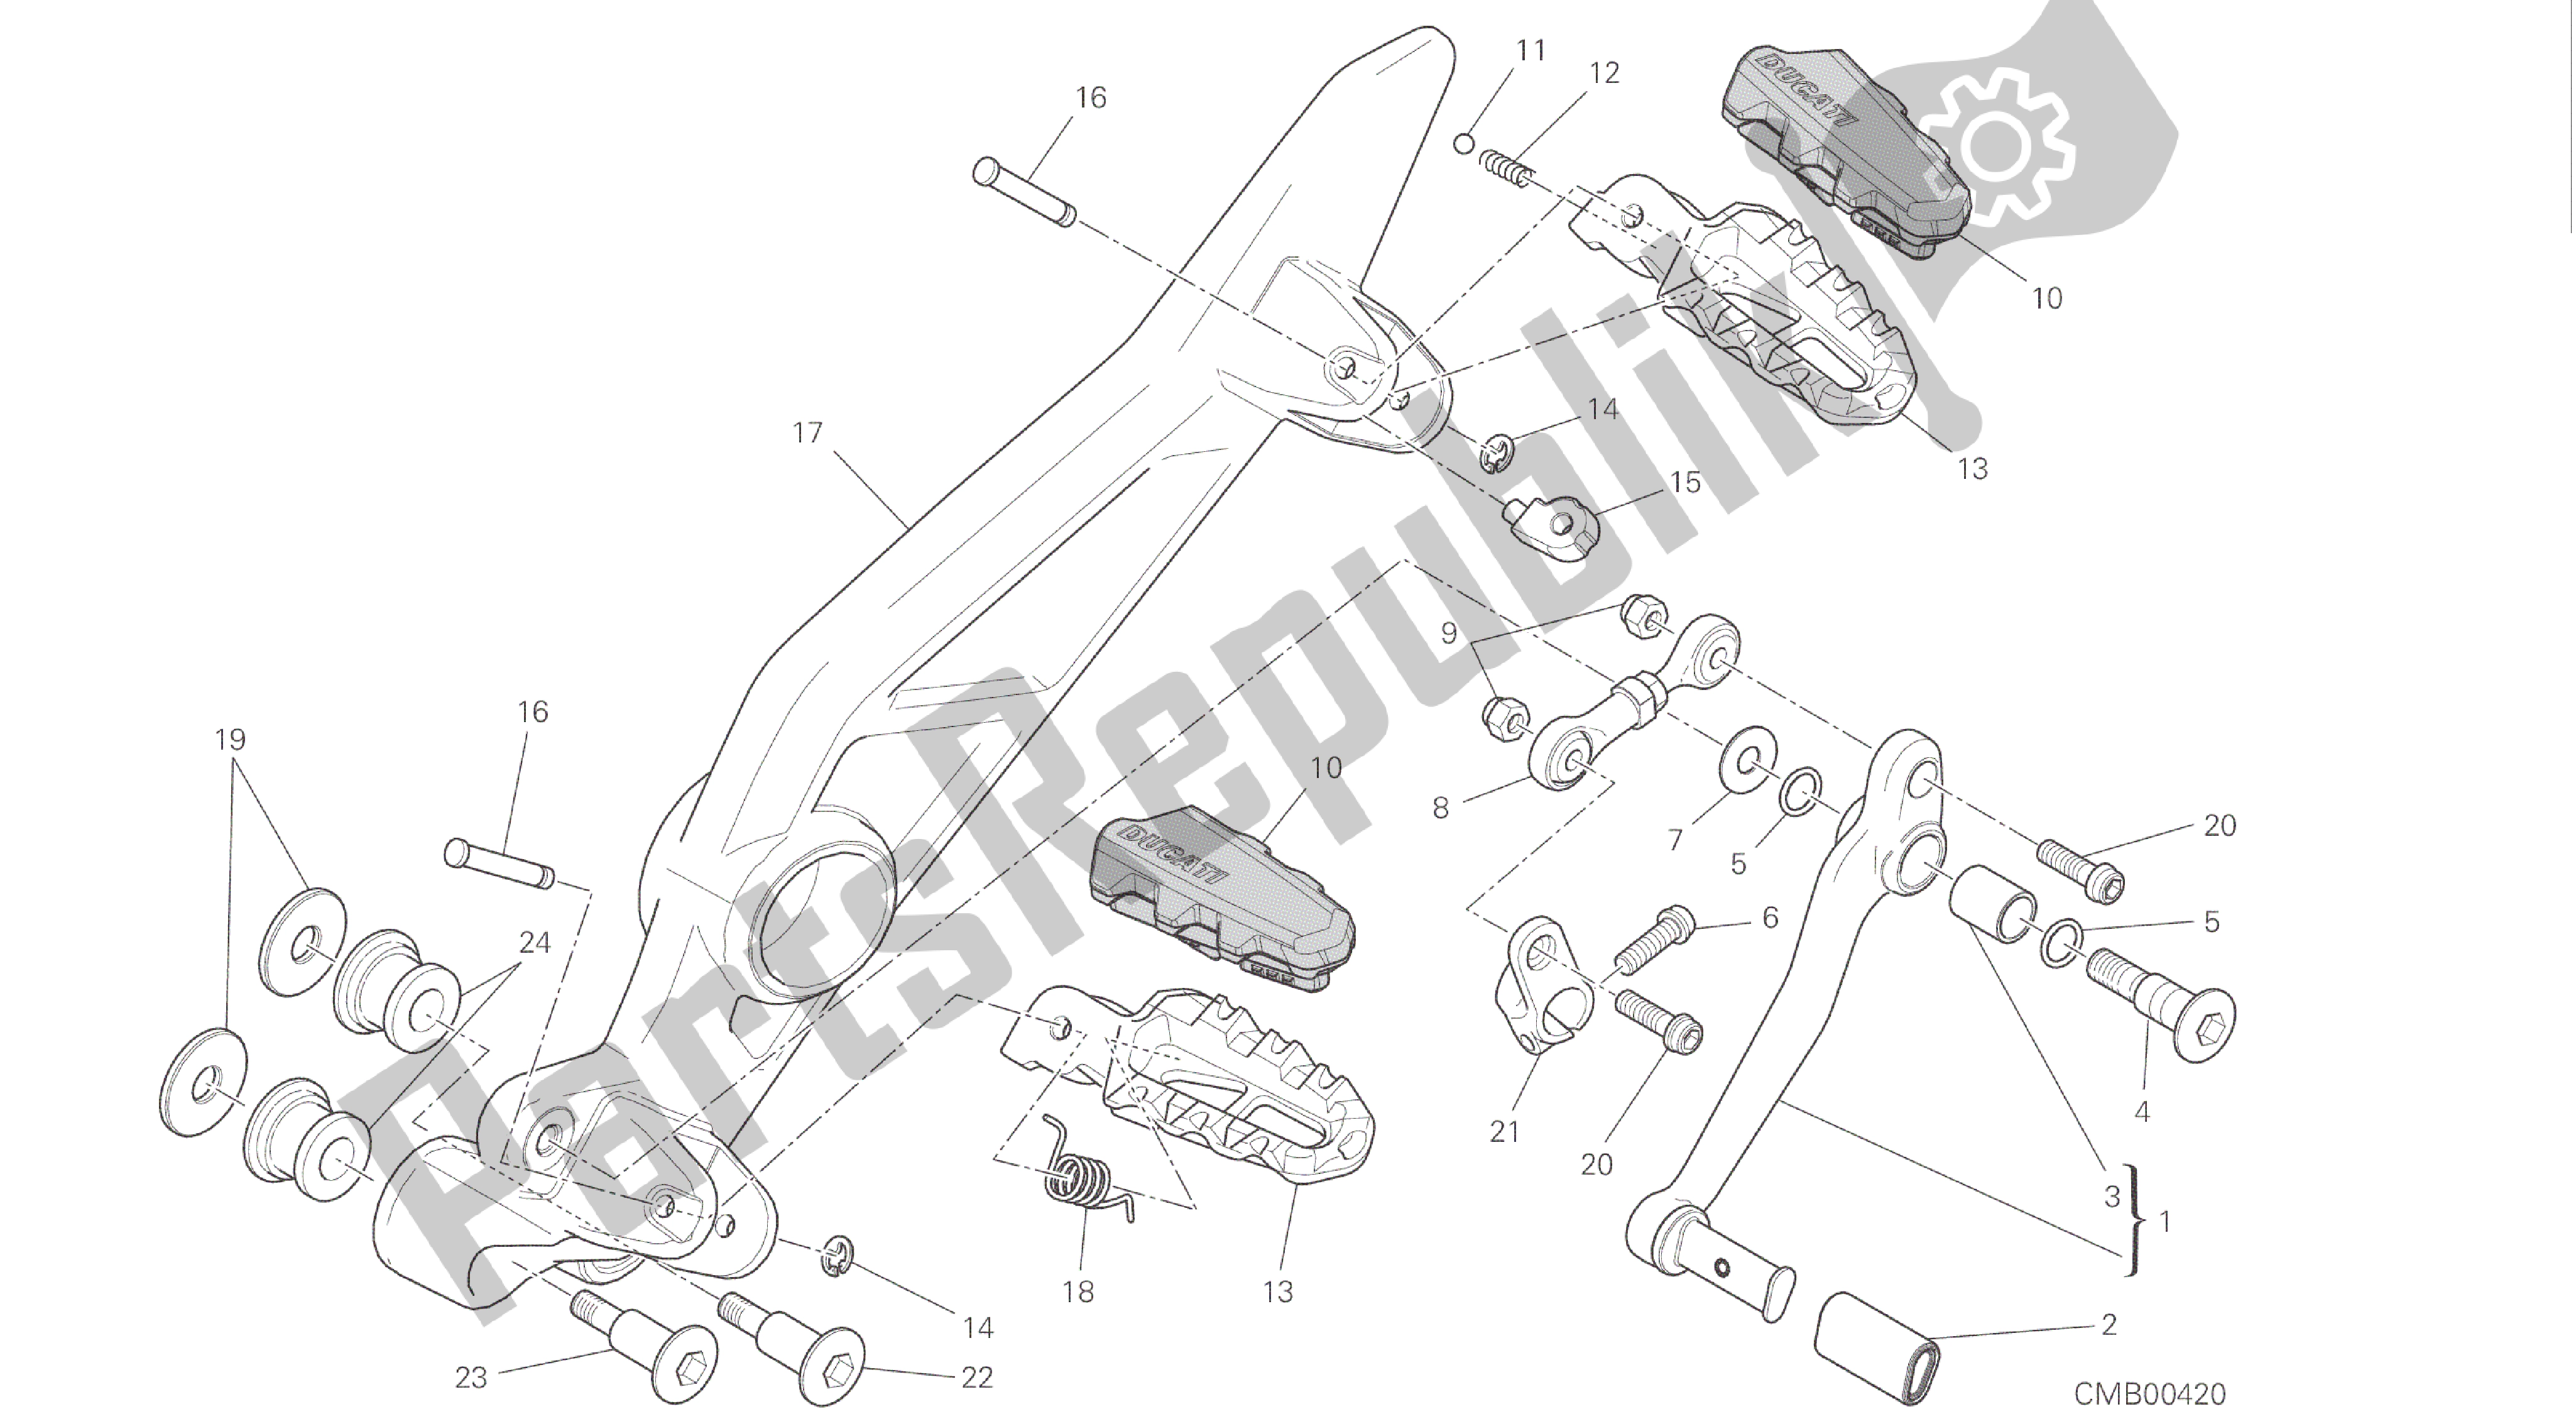 All parts for the Drawing 027 - Footrests, Left [mod:hyp Str;xst:aus,eur,fra,jap,twn]group Frame of the Ducati Hypermotard 821 2015